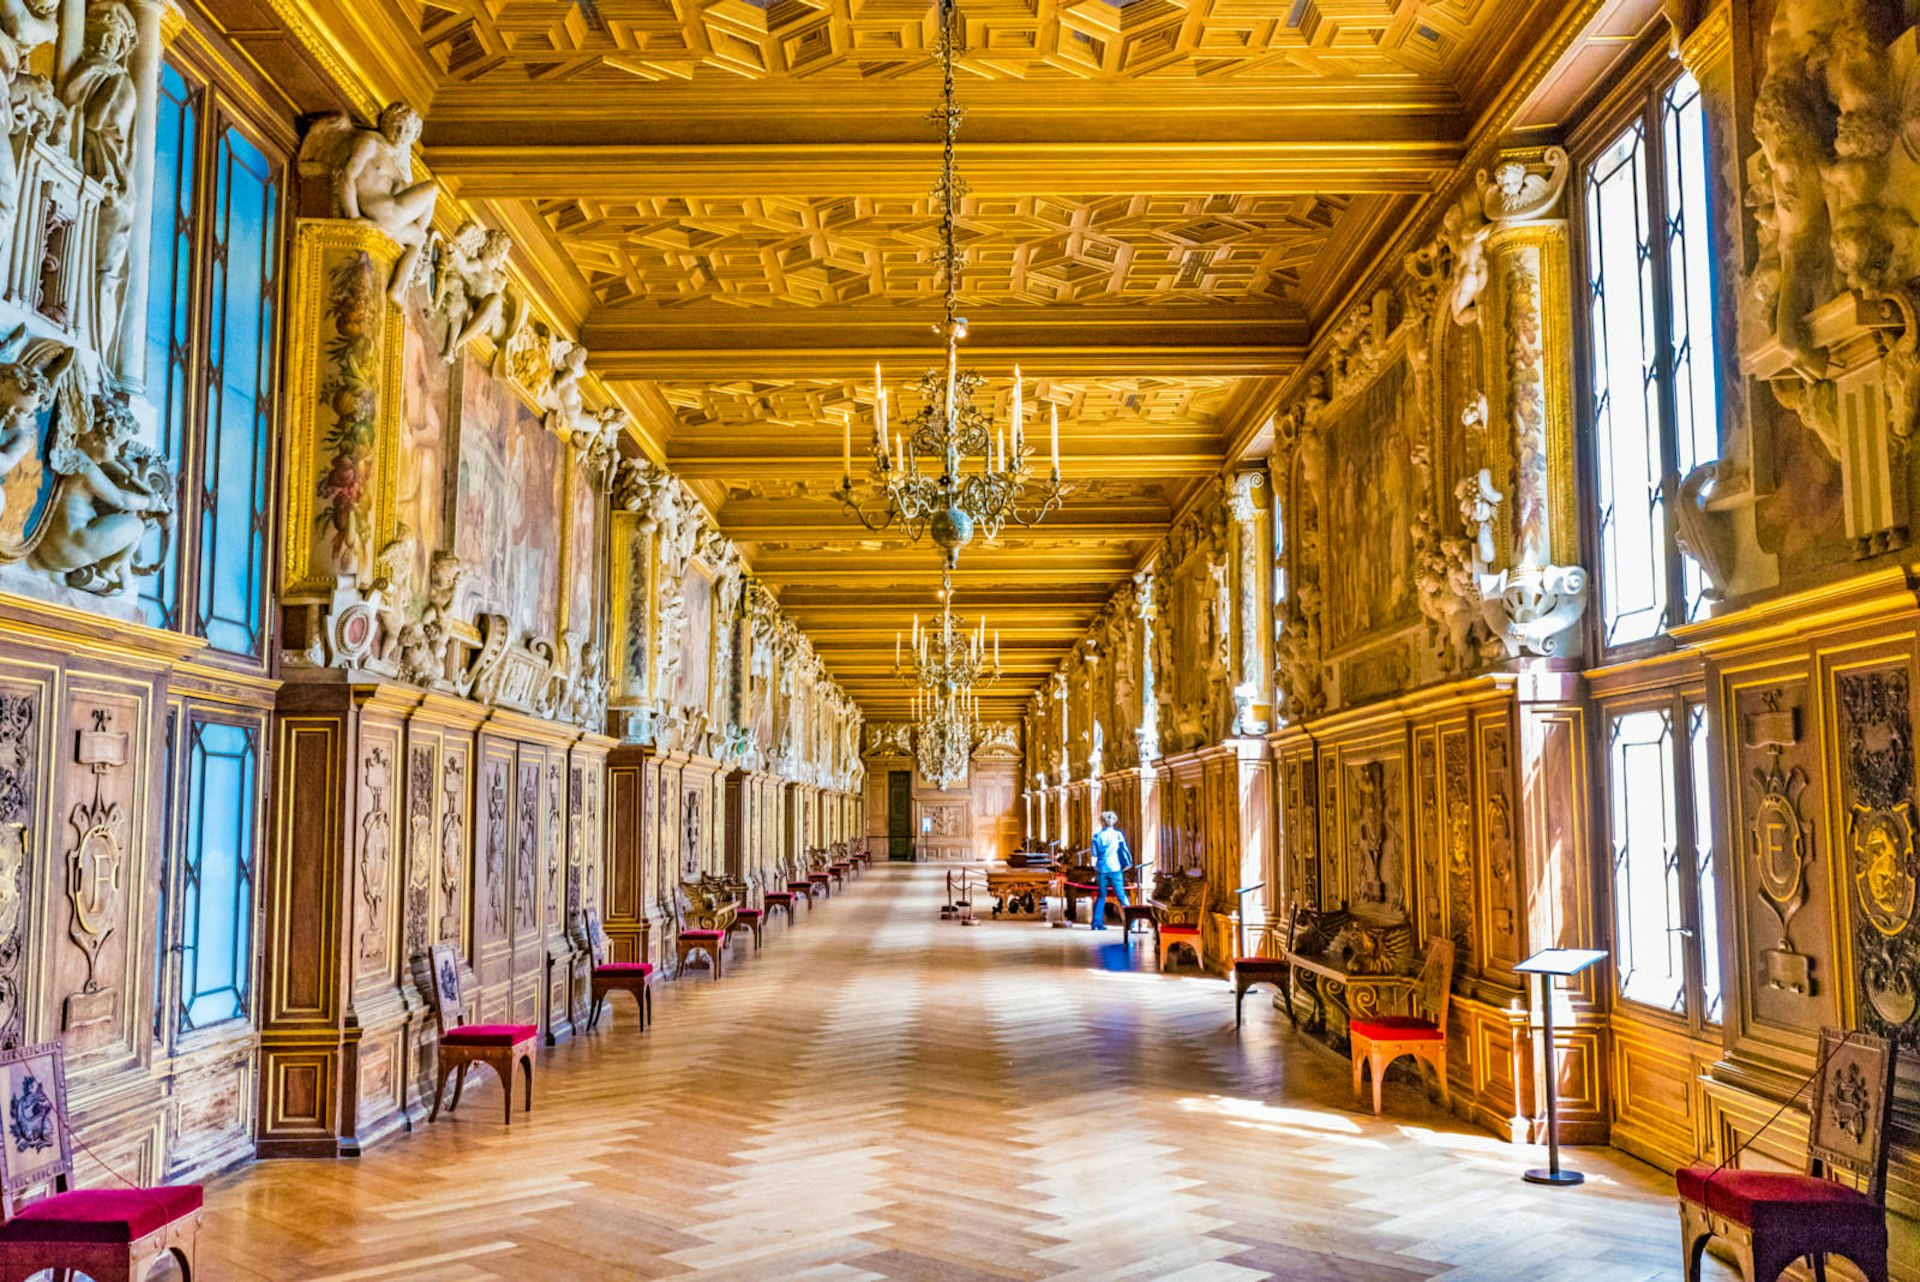 The interior of the Royal Palace of Fontainebleau in France © Takashi Images / Shutterstock